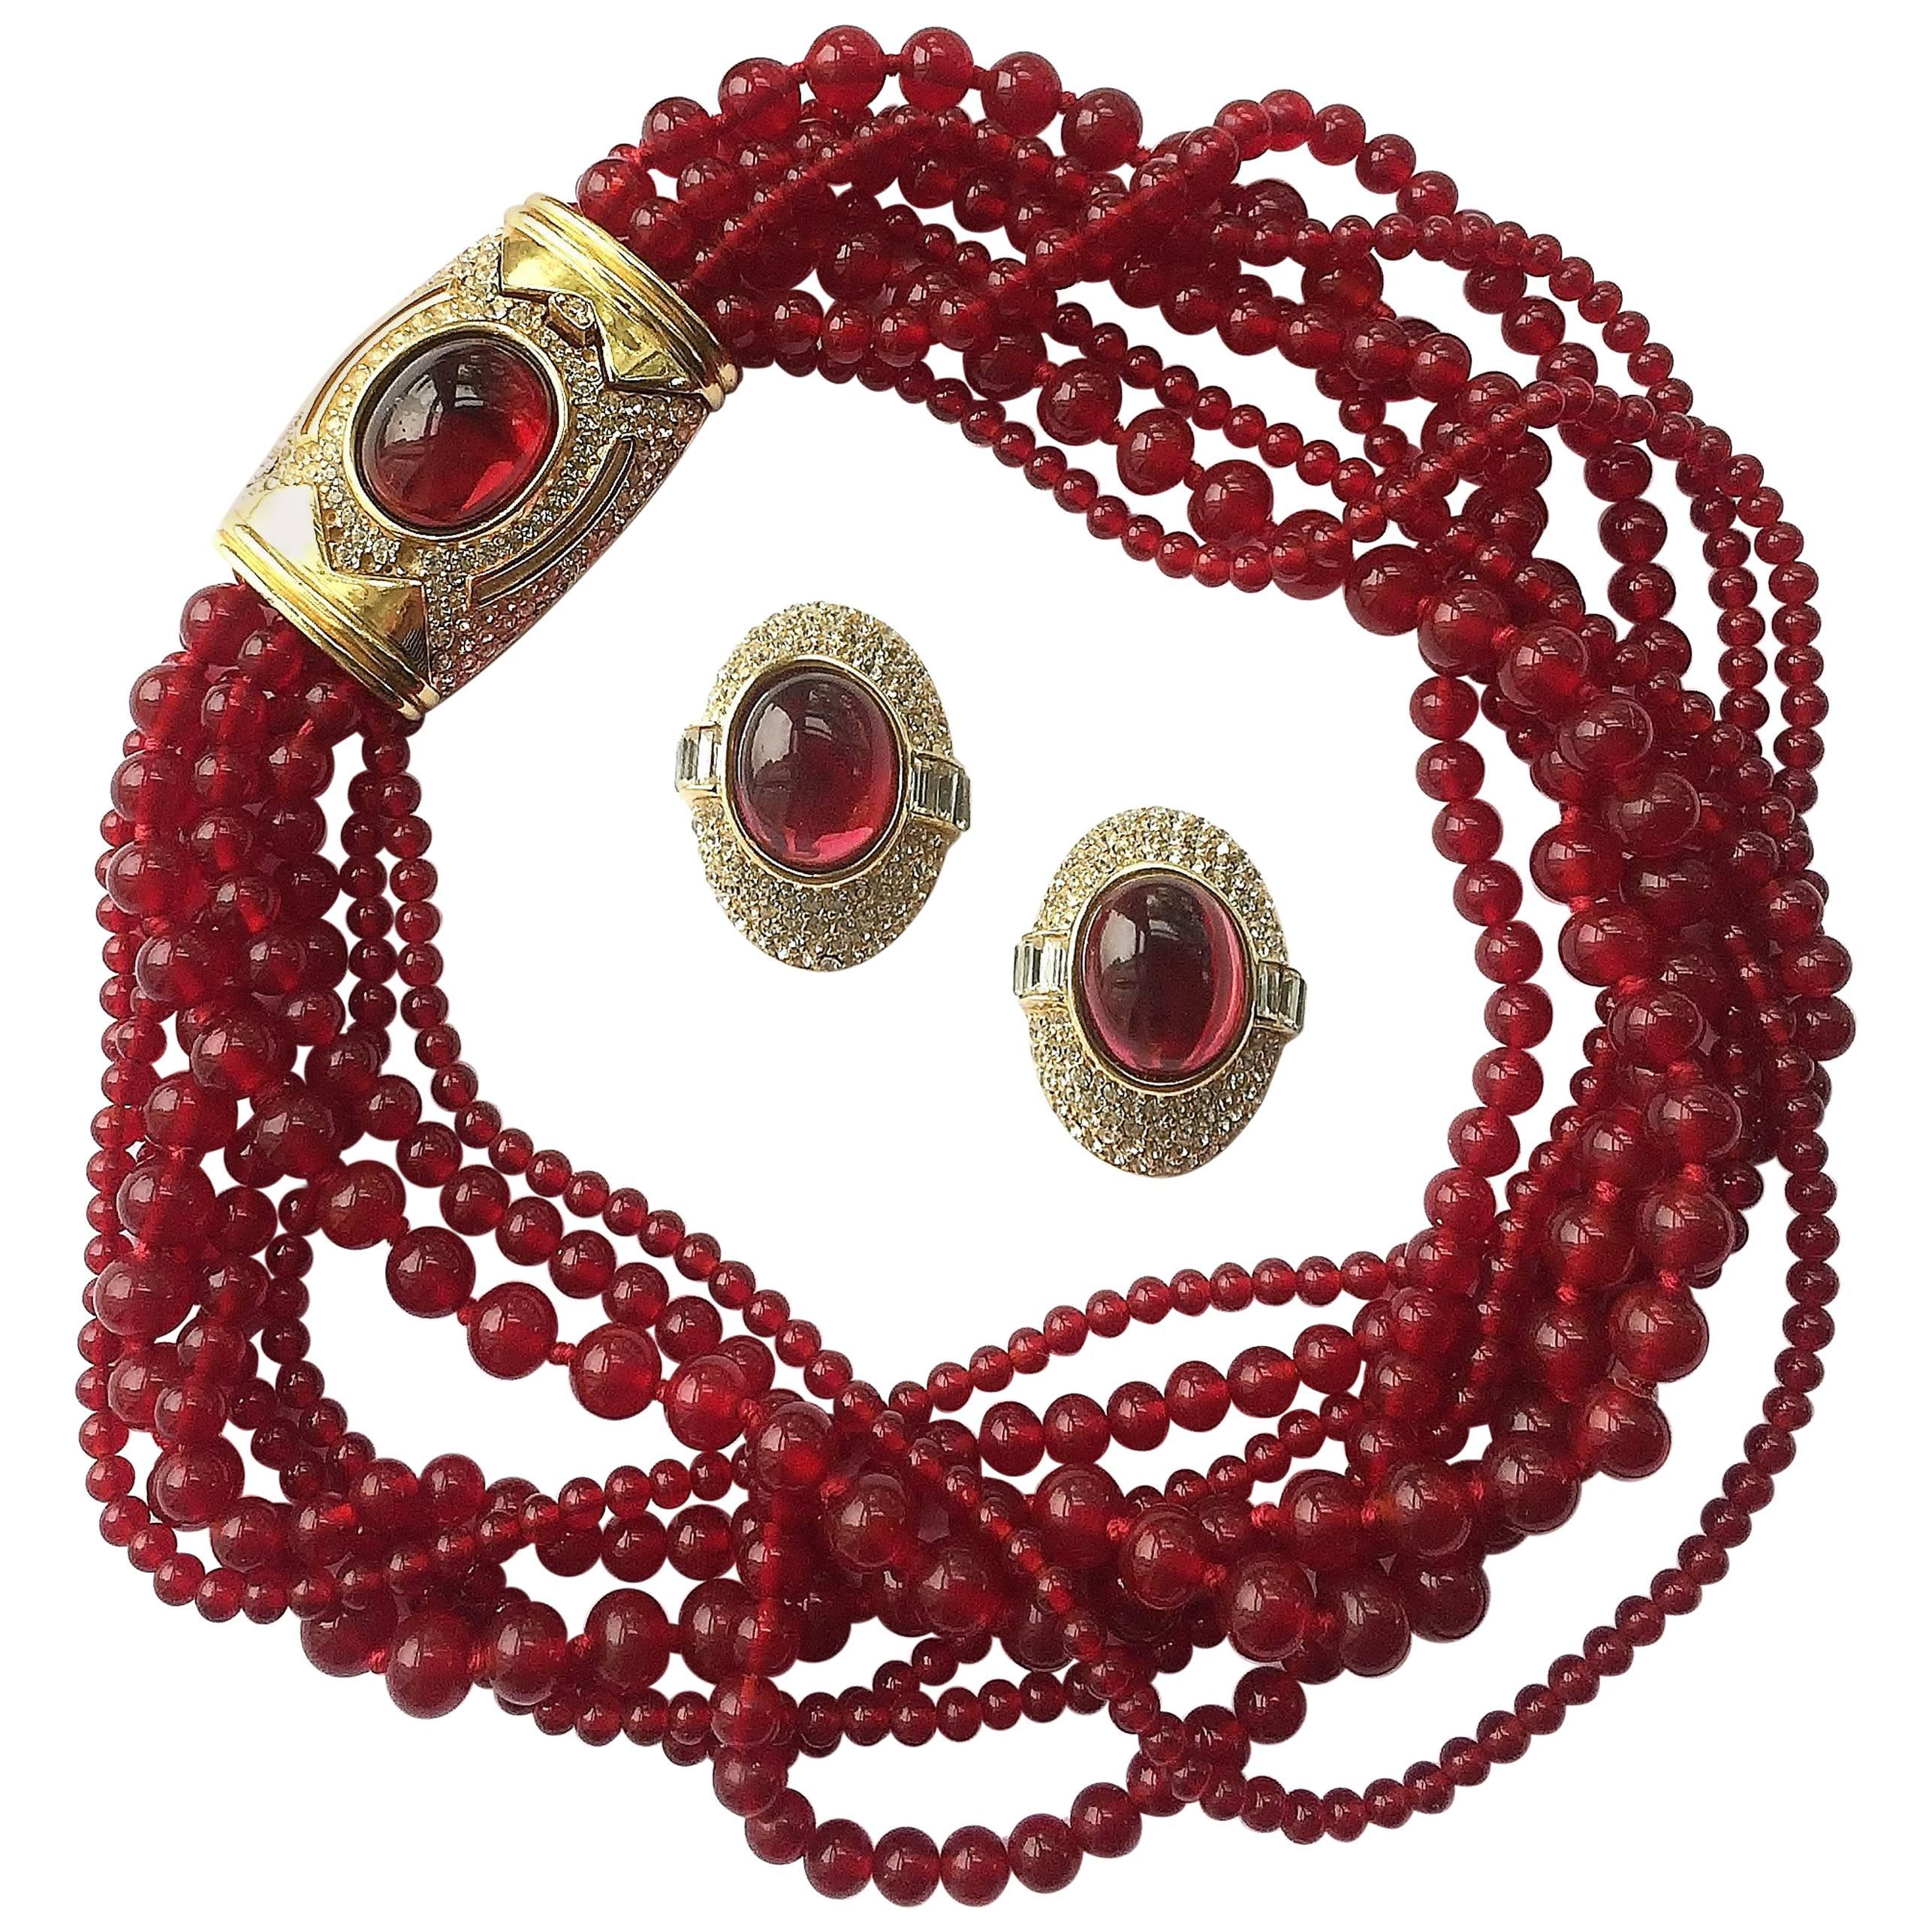 1980s Ciner garnet glass necklace and earrings set